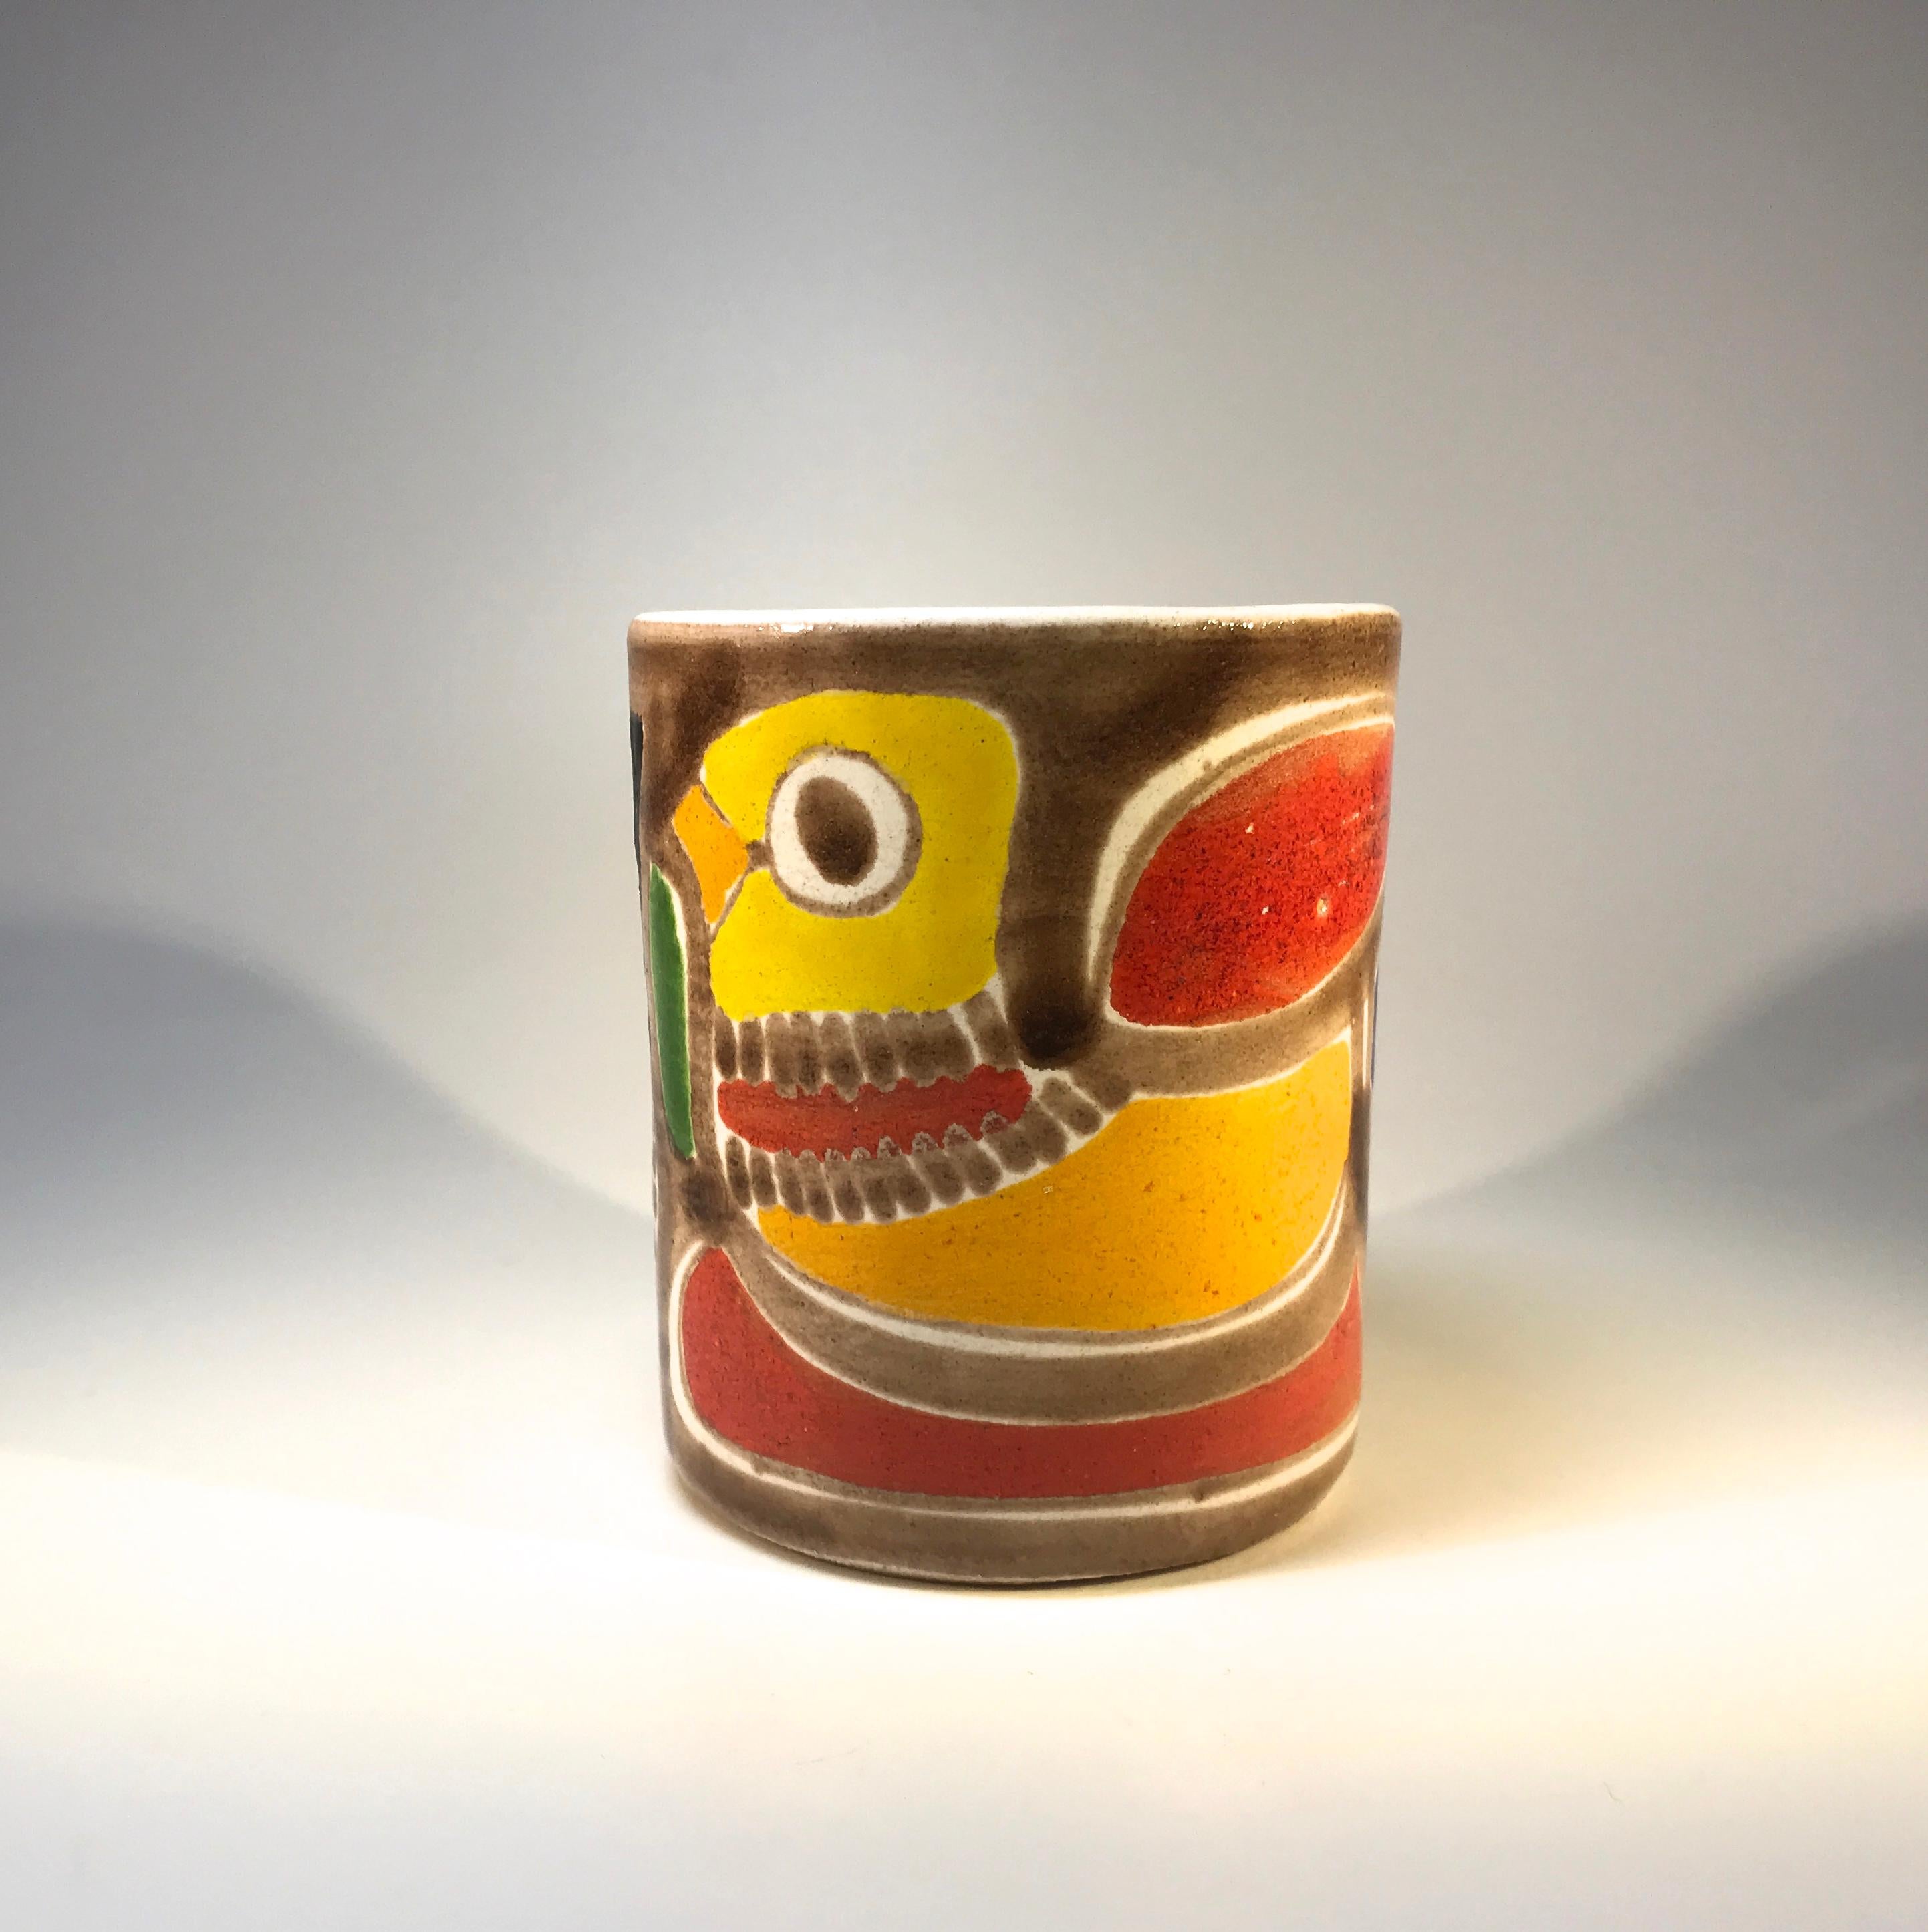 DeSimone of Italy, ceramic coffee mug hand decorated with a cheerful chirpy bird
A fun piece of Italian dash,
Circa 1960's
Signed DeSimone, Italy
Measures: Height 4.25 inch, diameter 3.5 inch
Very good condition with excellent colouring. Two